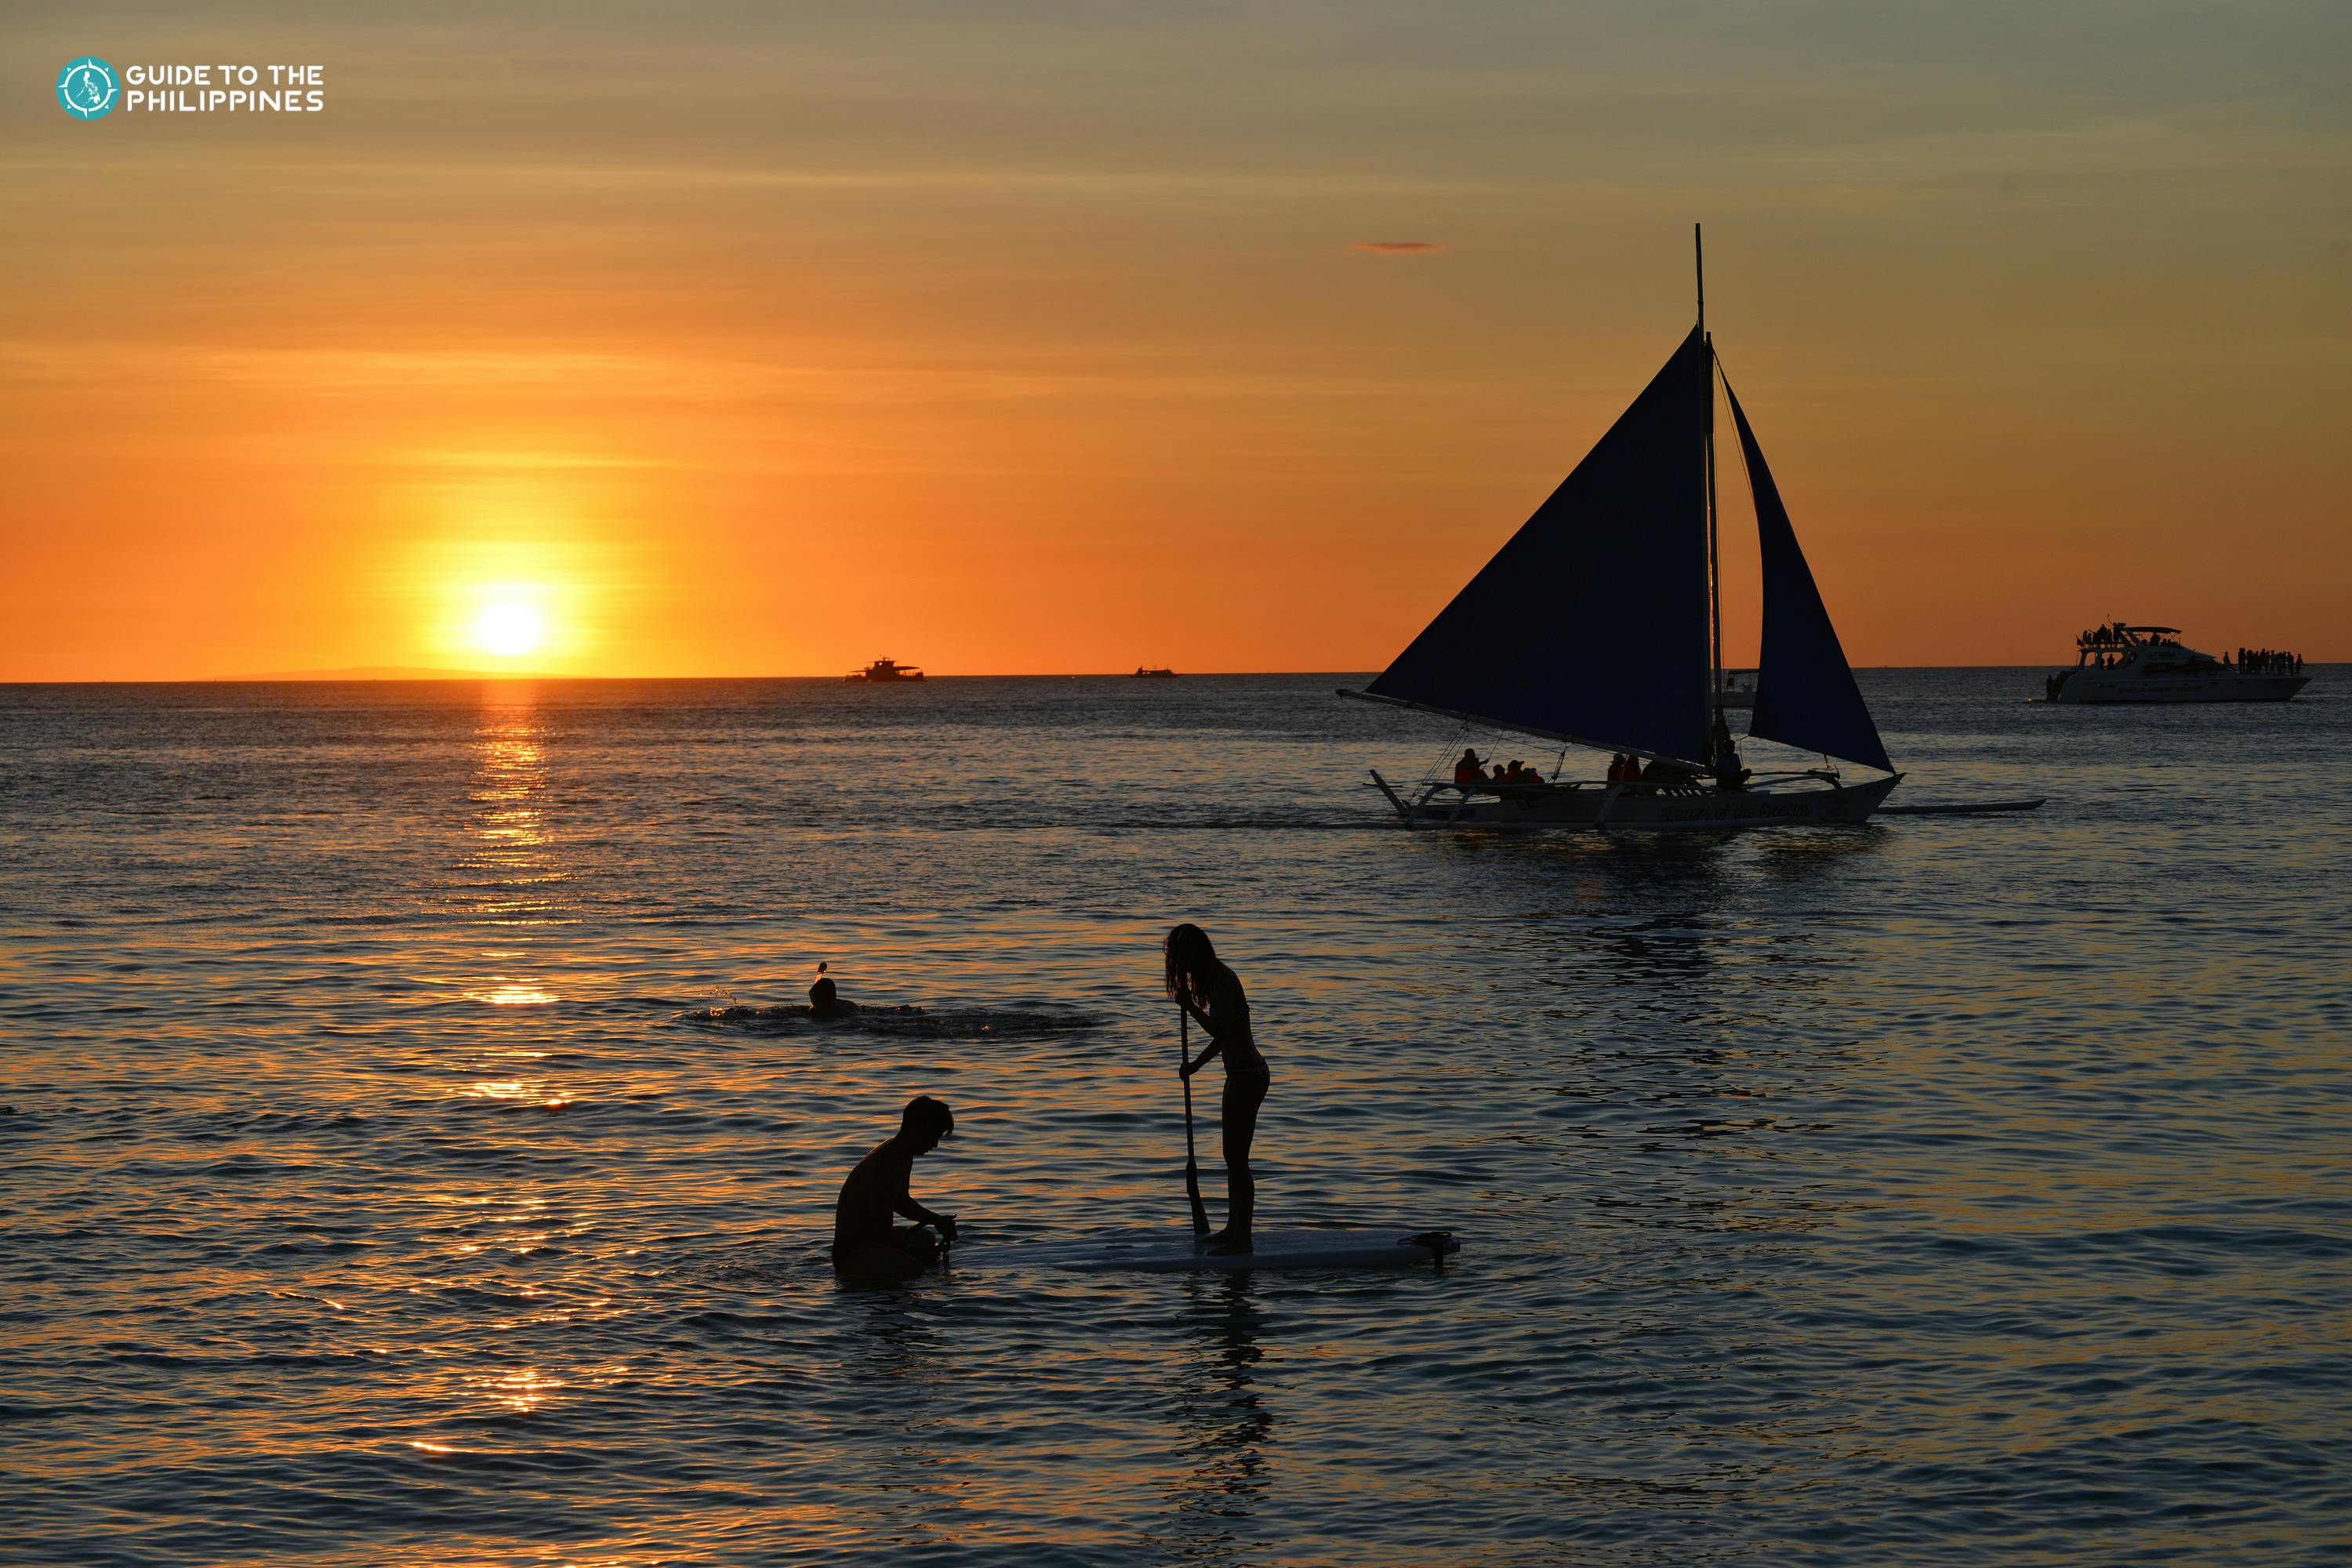 Watch the sunset from White Beach in Boracay Island